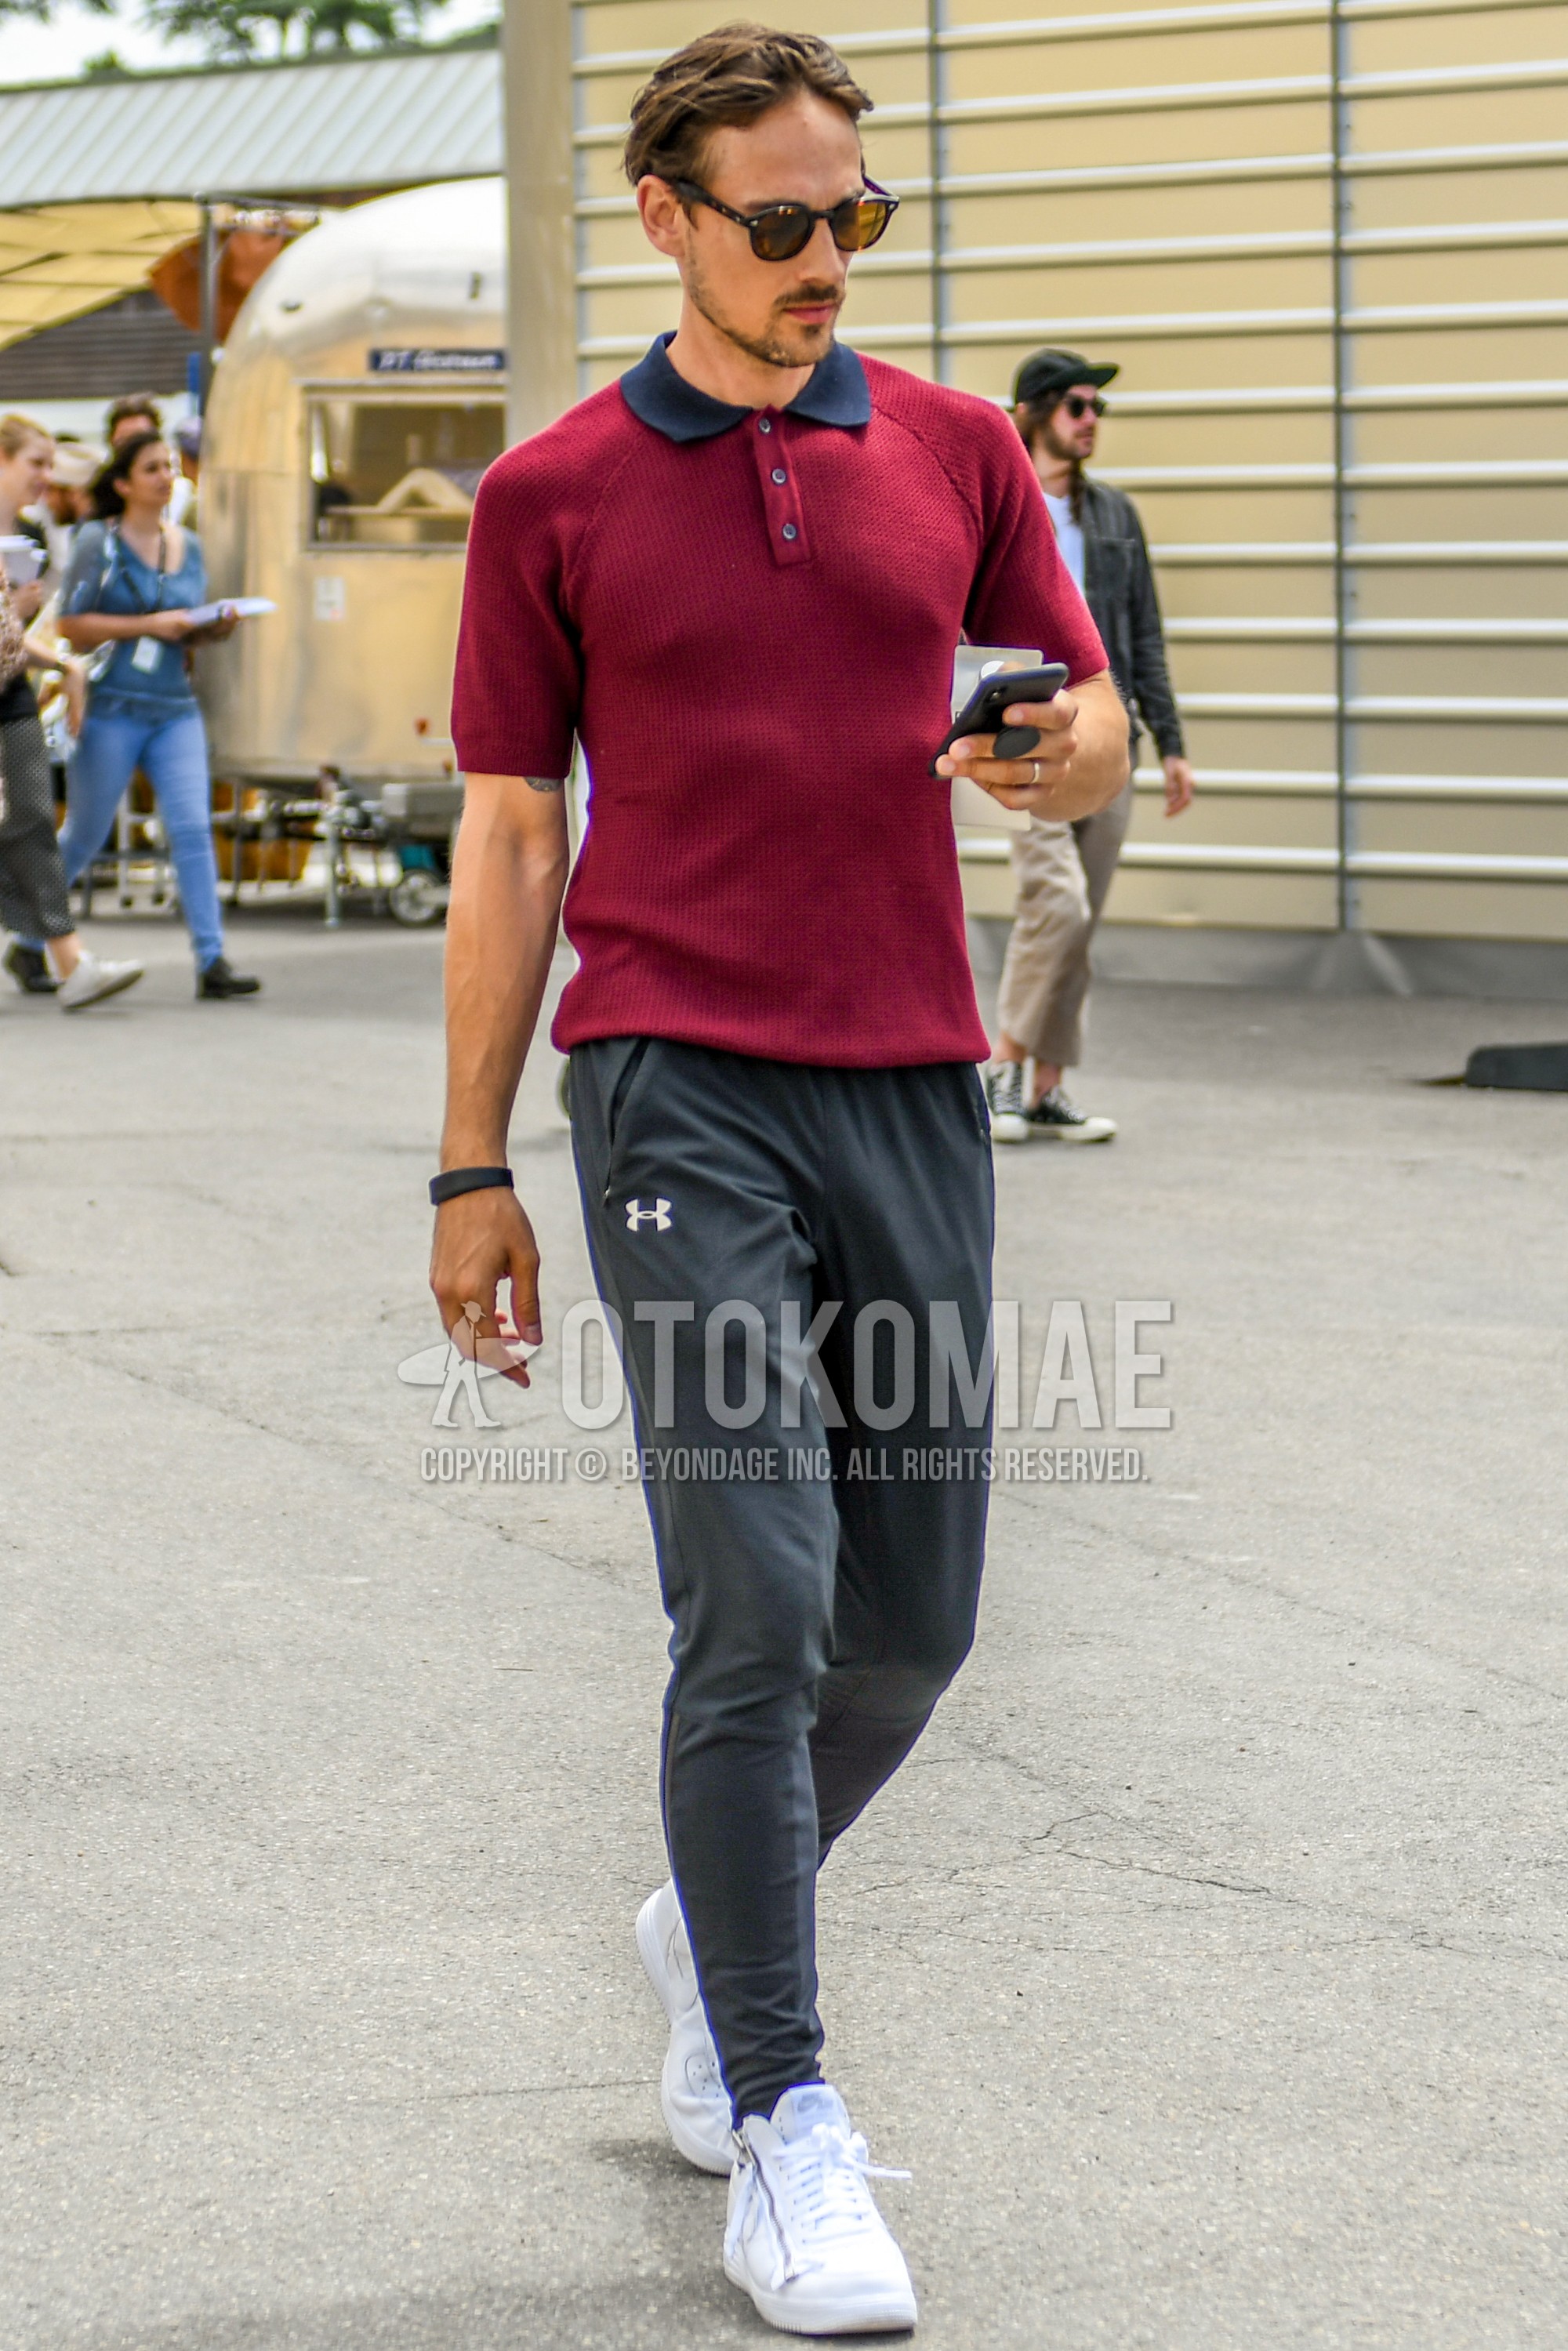 Men's spring summer outfit with brown tortoiseshell sunglasses, red plain polo shirt, gray plain sweatpants, white high-cut sneakers.